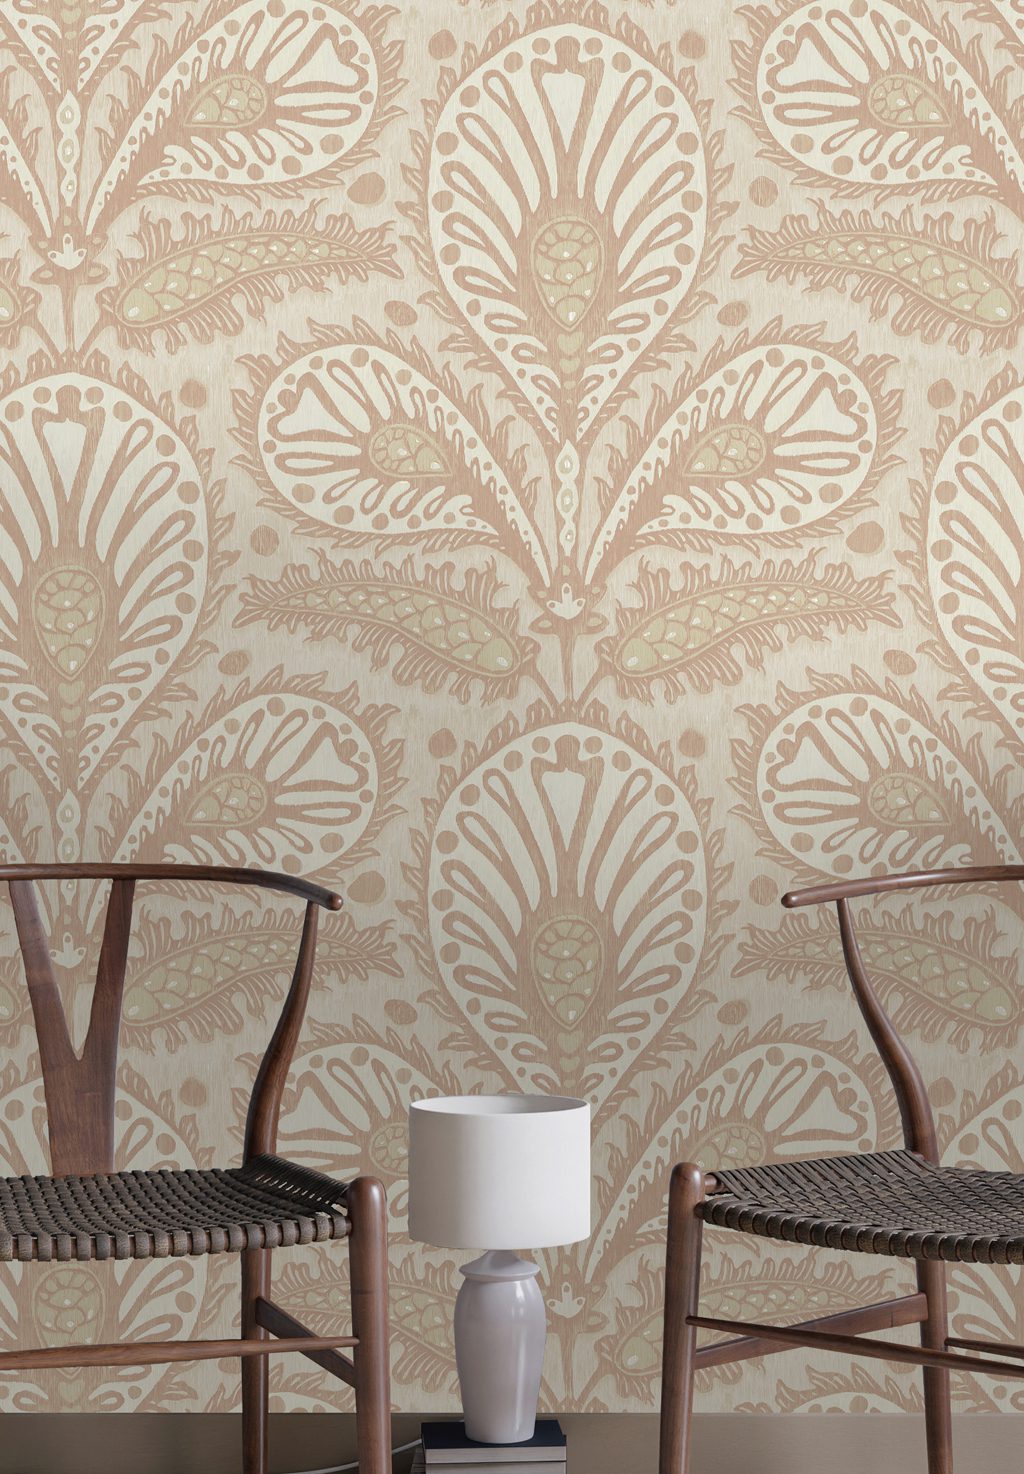 Josephine-Munsey-Ikat-clover-wallpaper-large-scale-ogee-shape-design-foliage-print-paisley-pattern-four-colour-print-Brown